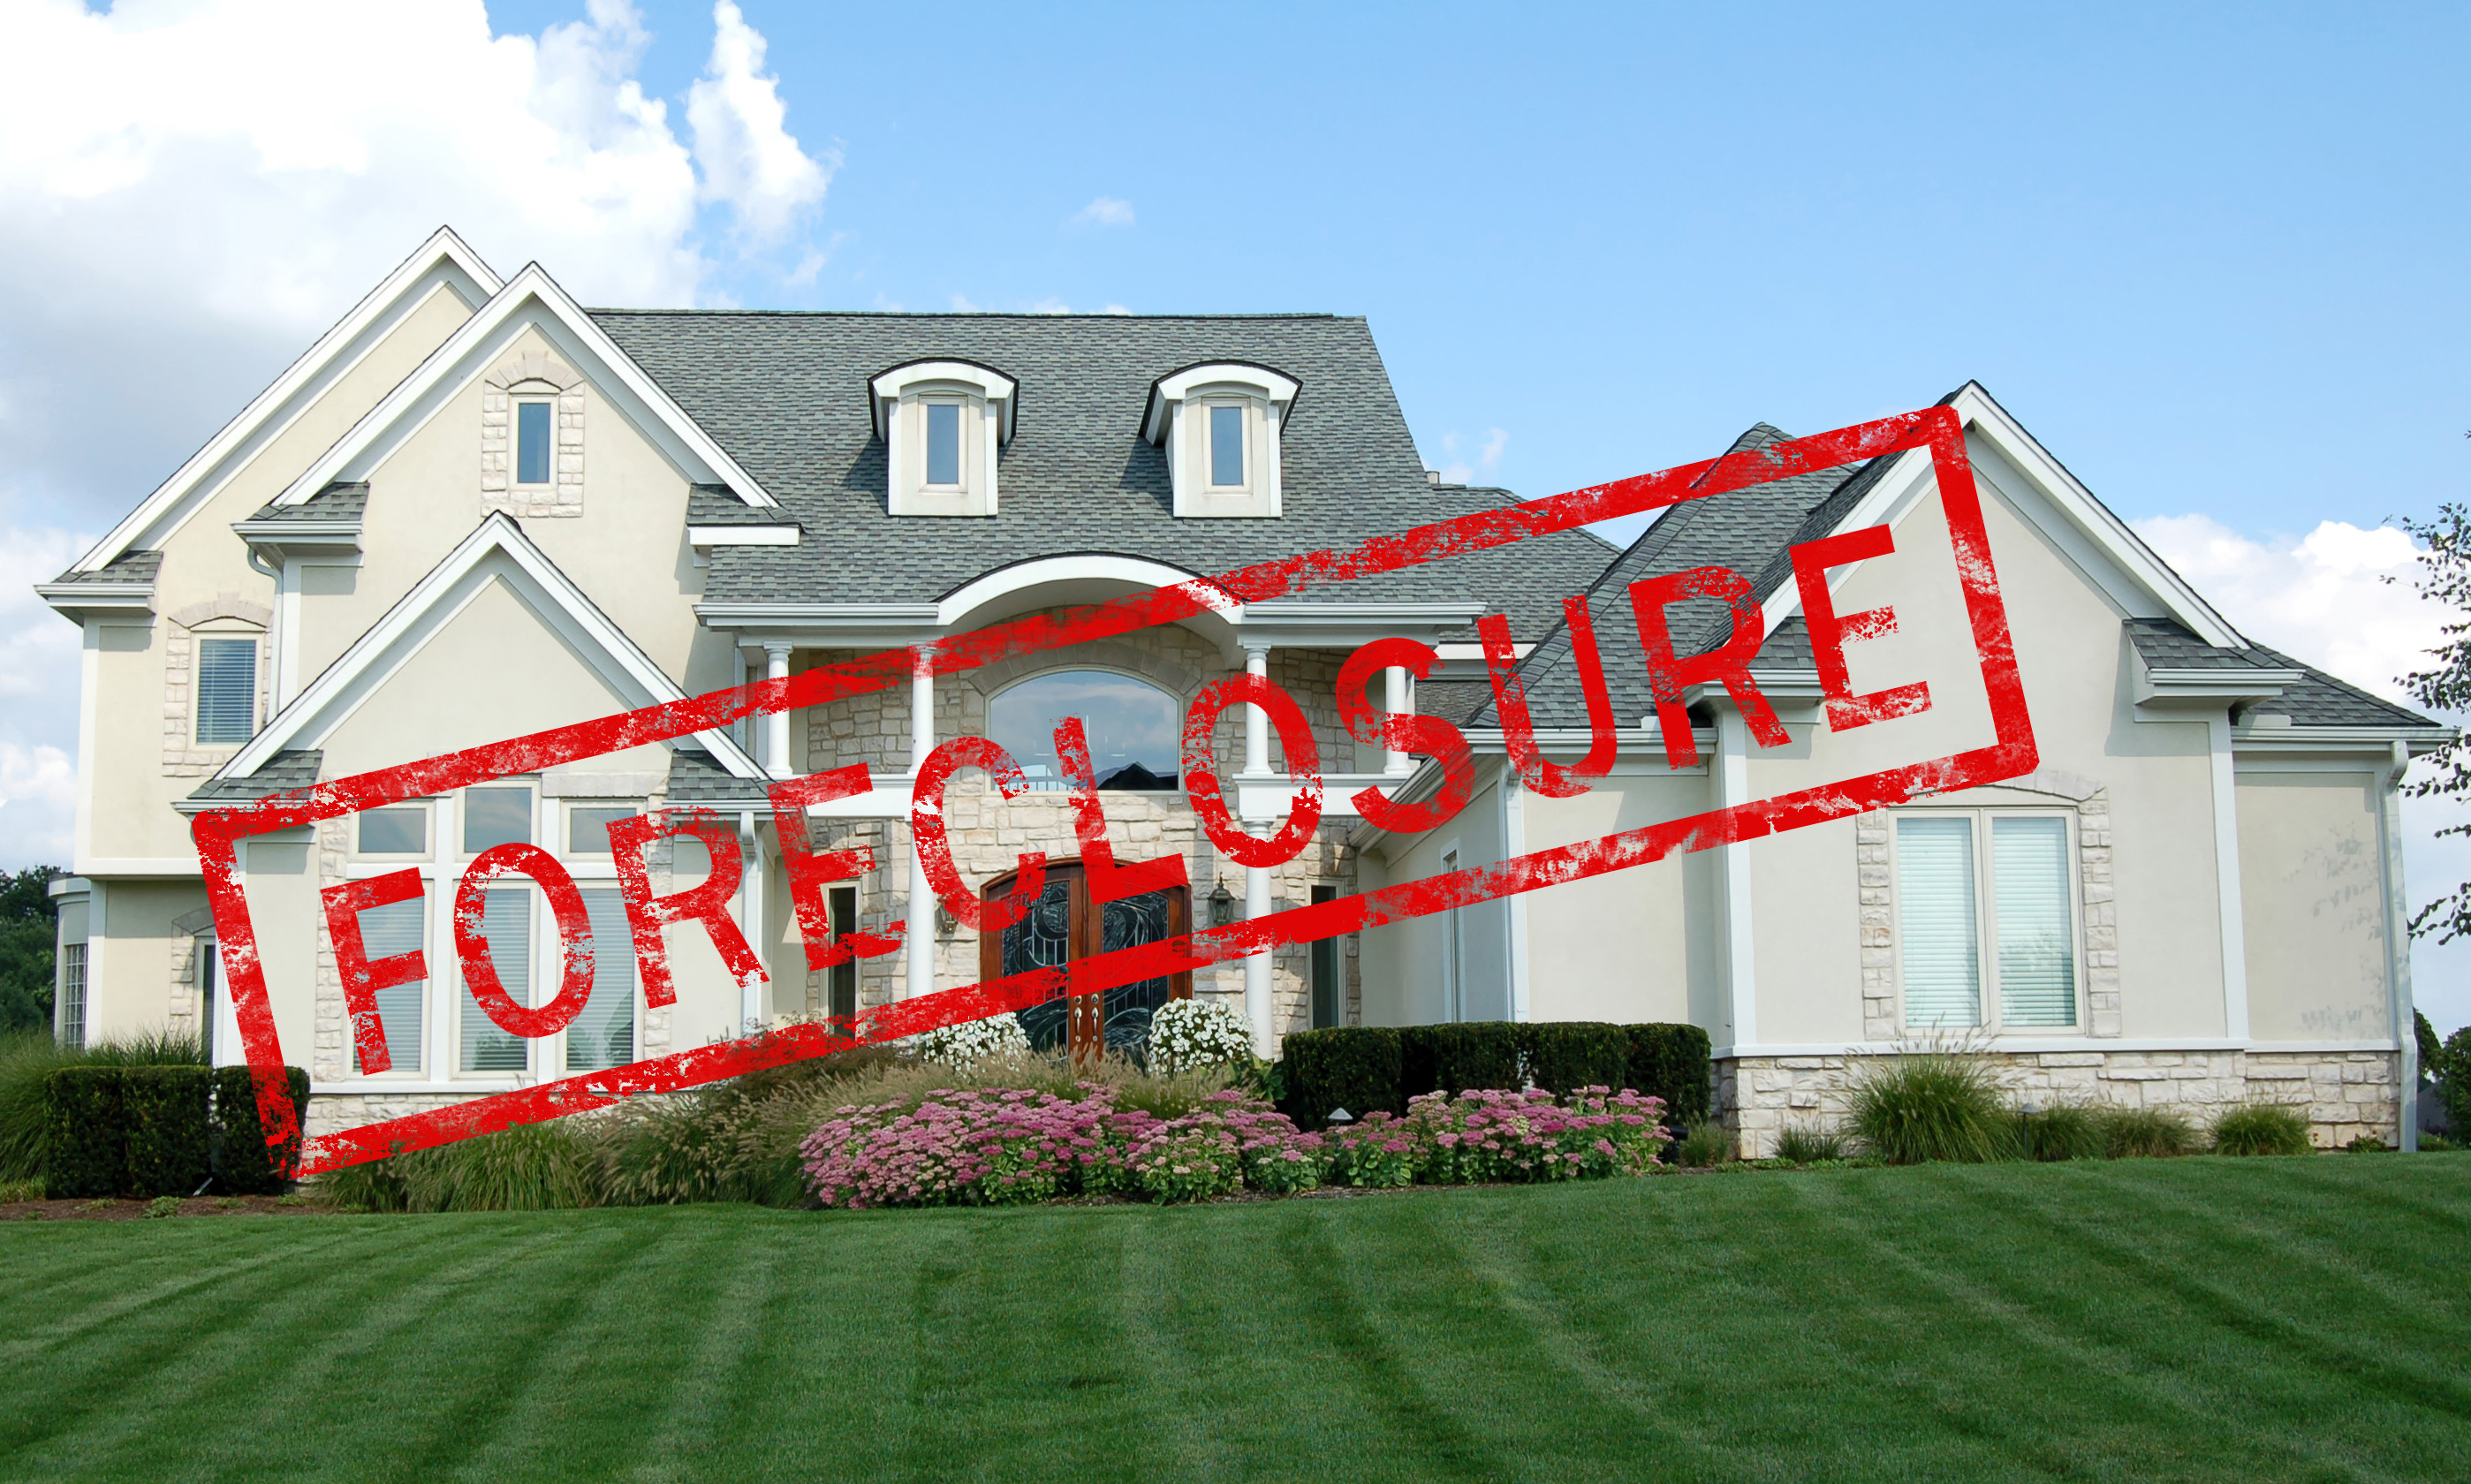 Call Quast Appraisal Services, Inc.  to discuss appraisals pertaining to Garland foreclosures